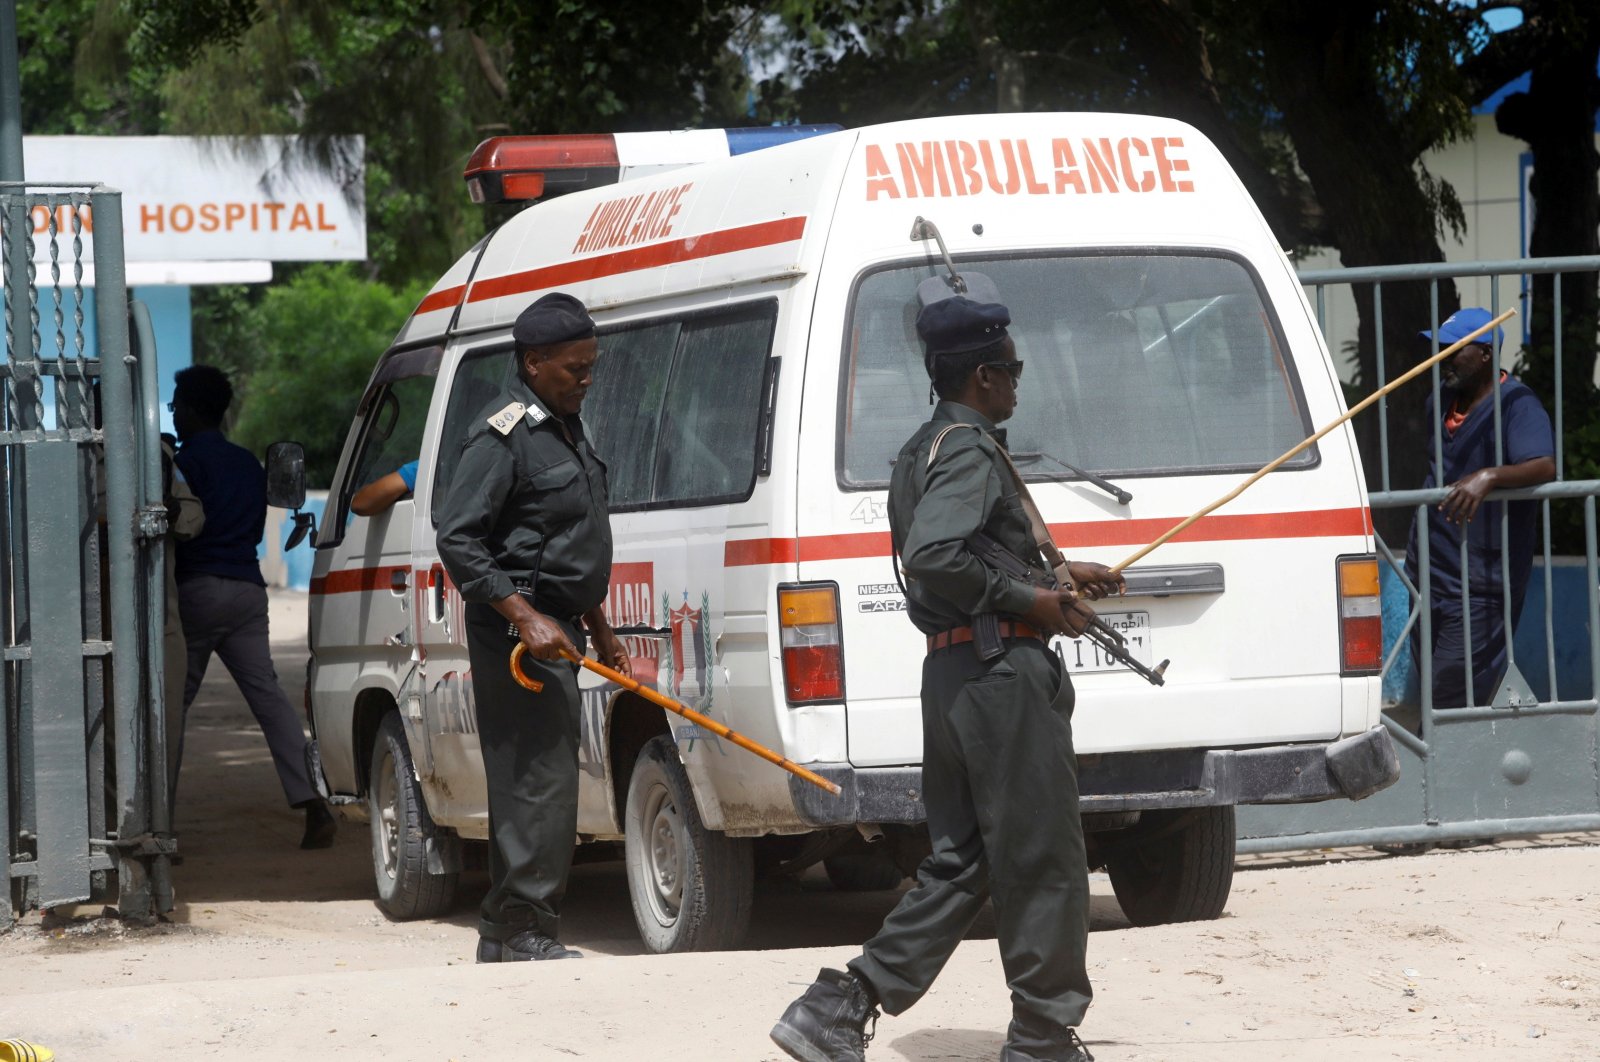 An ambulance carrying wounded from a suicide bombing attack at a military base arrives at a hospital in Mogadishu, Somalia, June 15, 2021. (Reuters Photo)